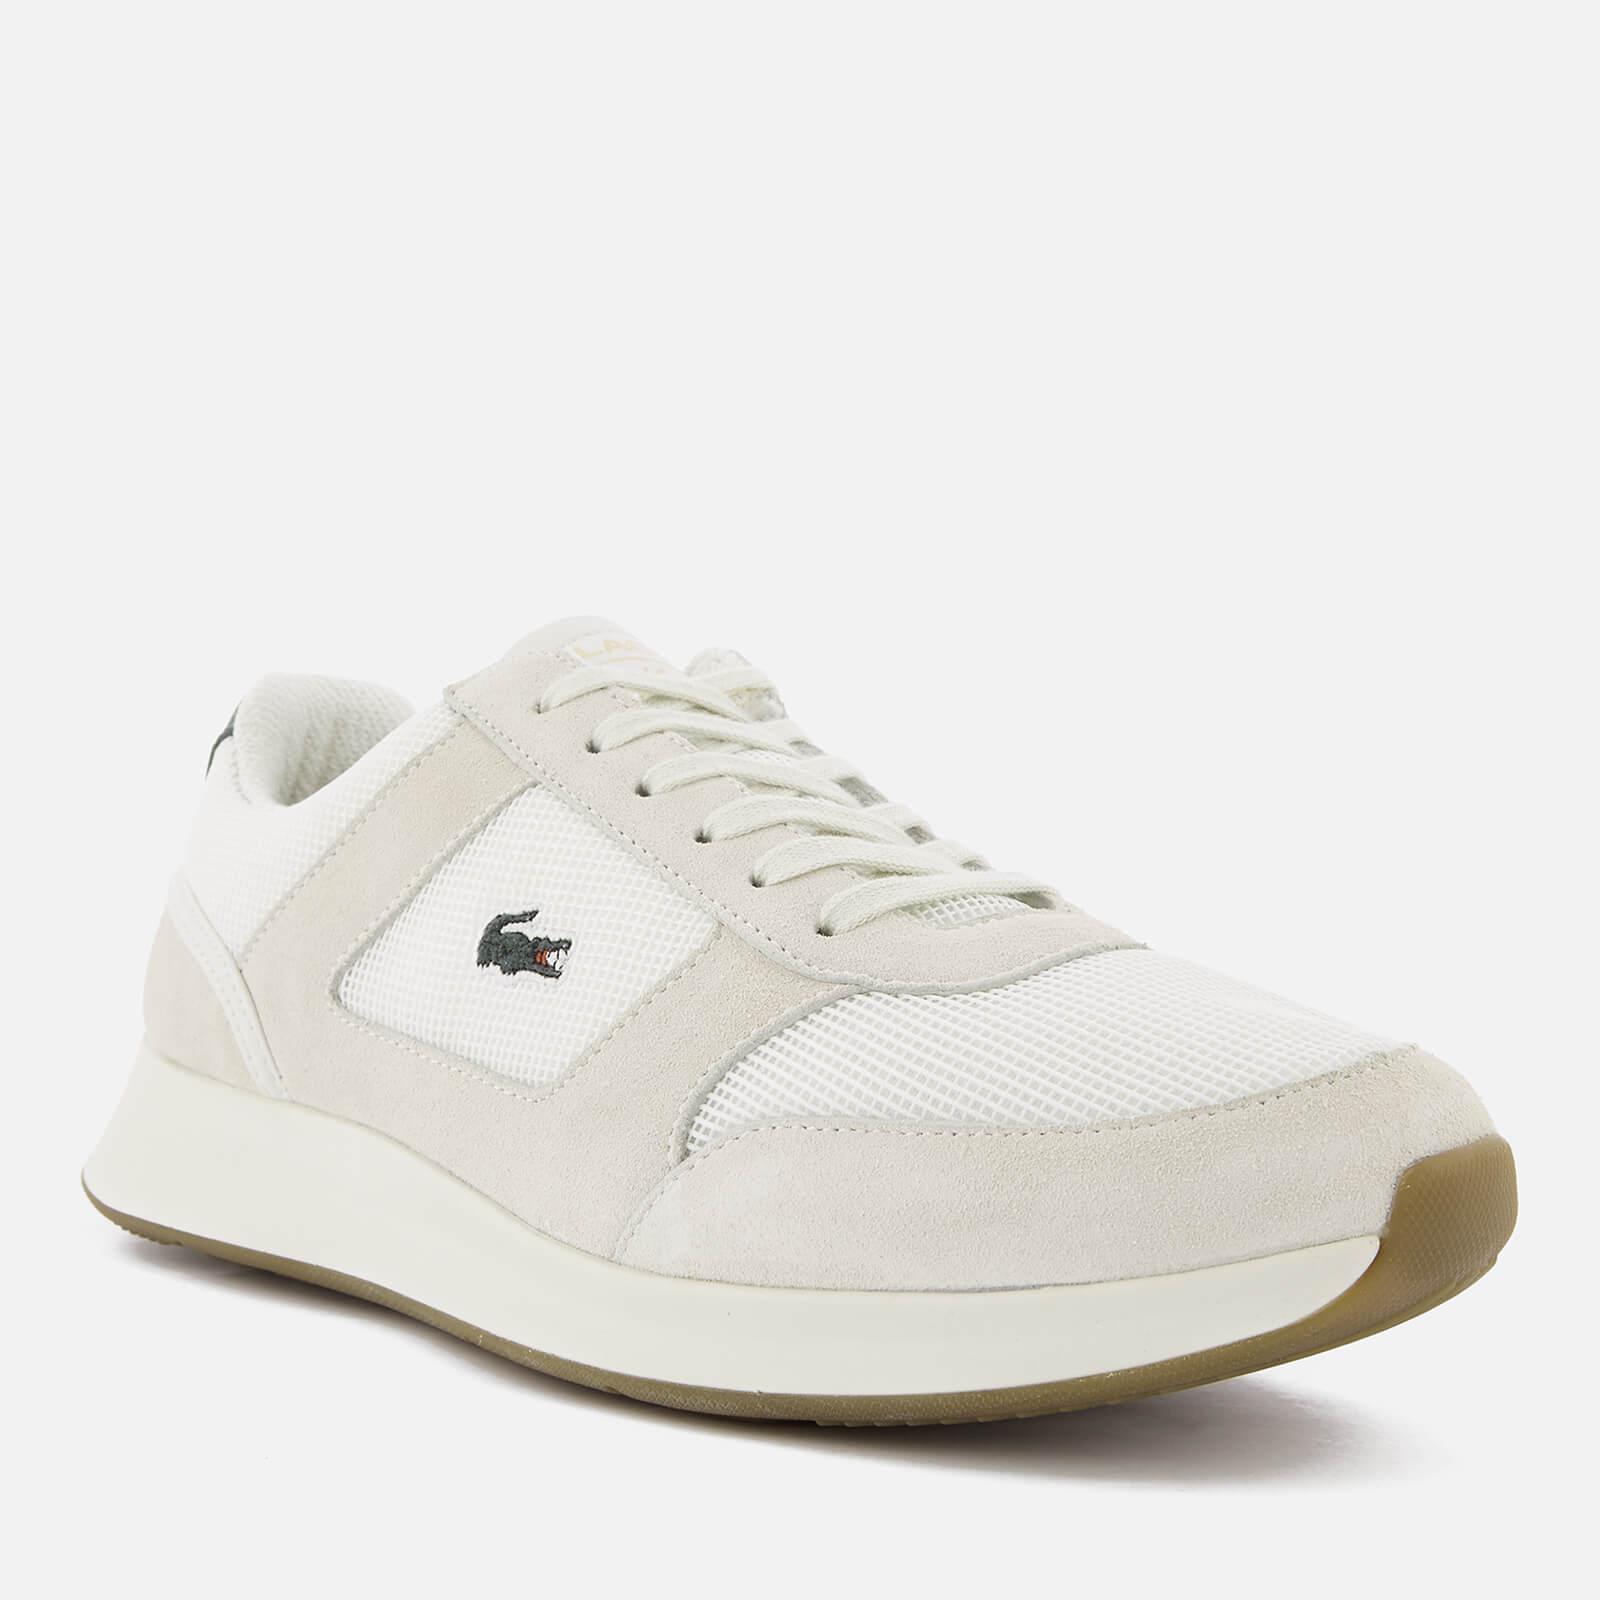 Lacoste Suede Joggeur 118 1 Runner 